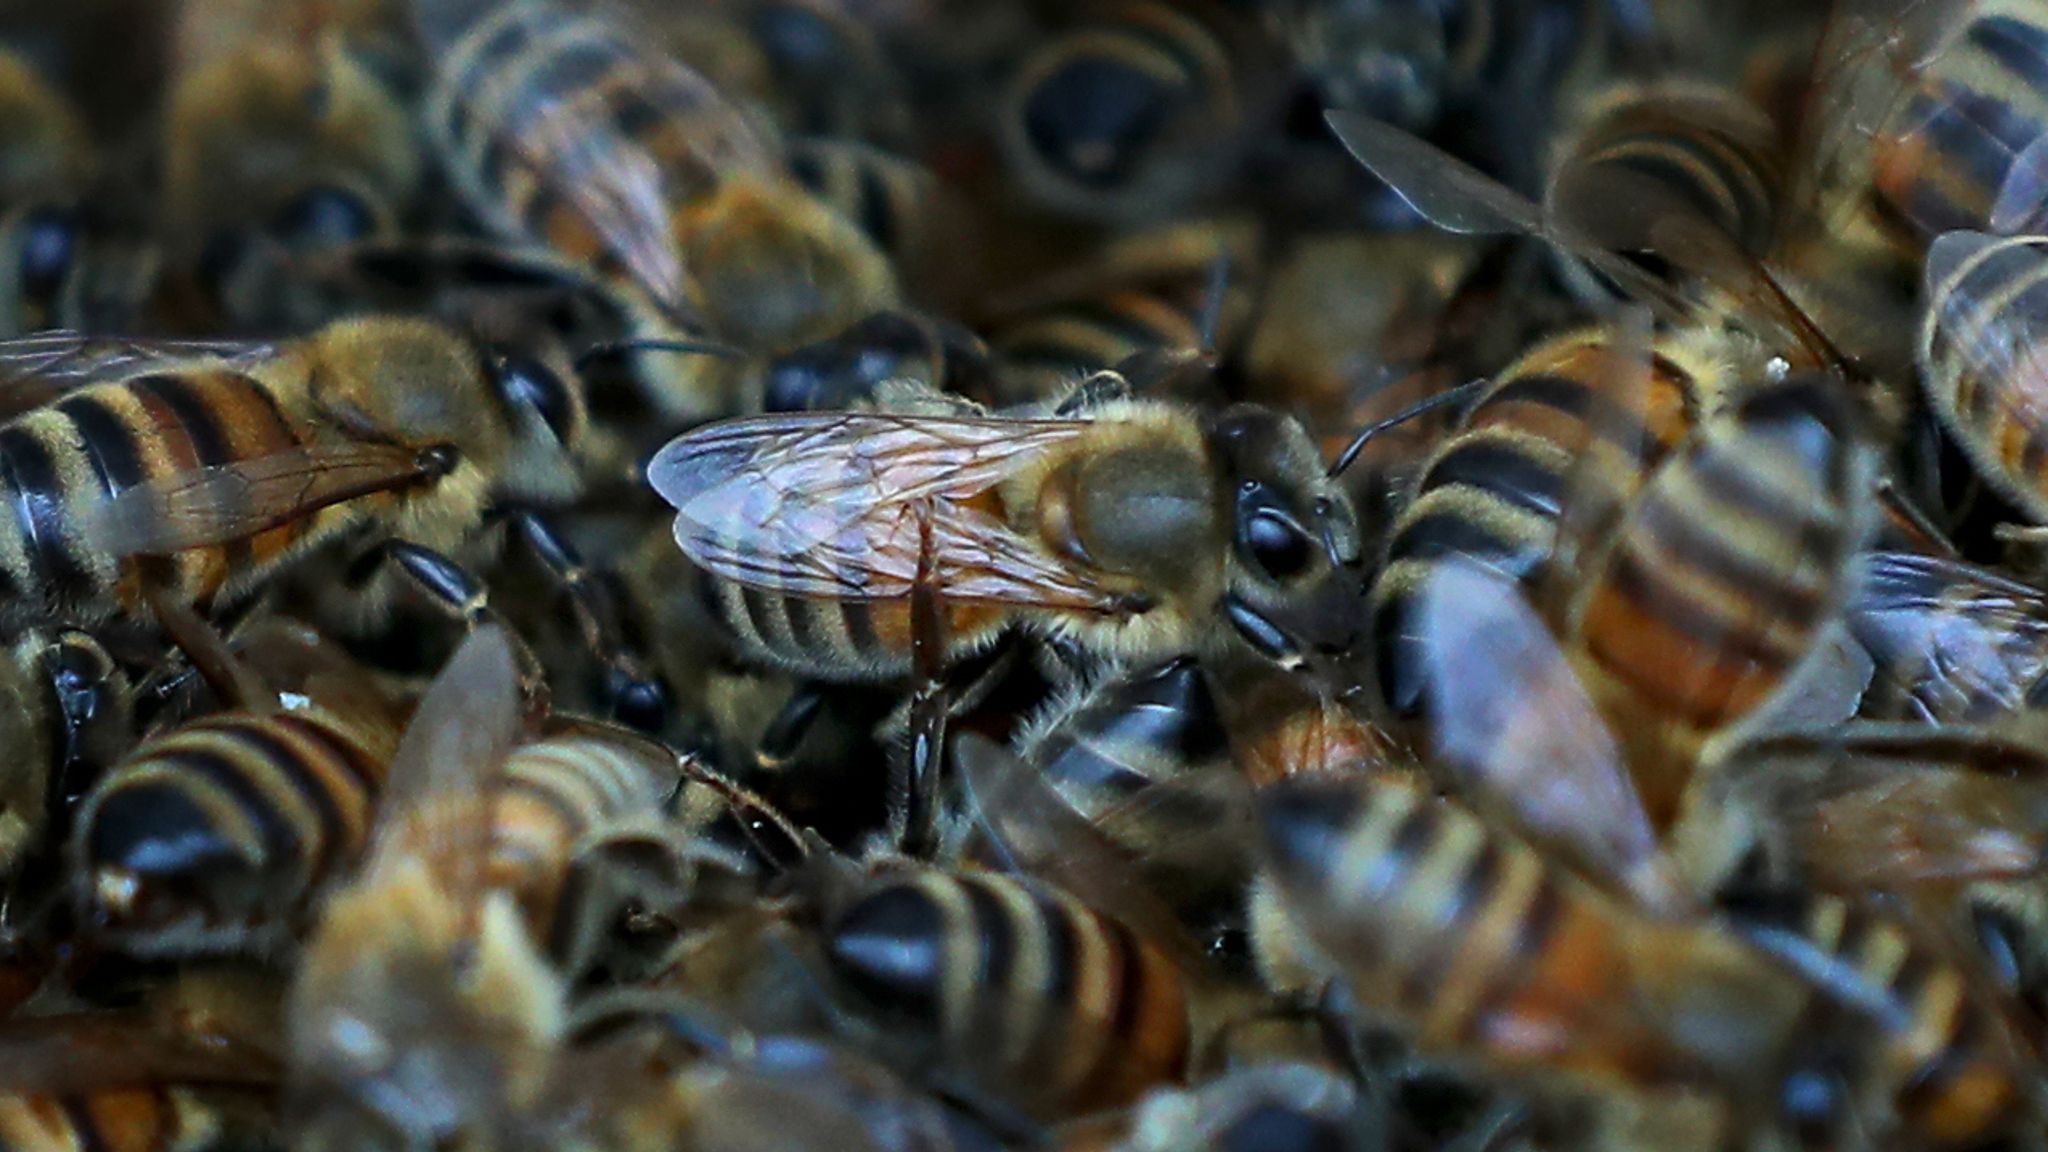 skynews-bees-kent-brexit_Brexit-15-million-baby-bees-could-be-seized-and-burned-over-monumentally-stupid-rules-rapid-news-rapidnews-dailyrapidnews